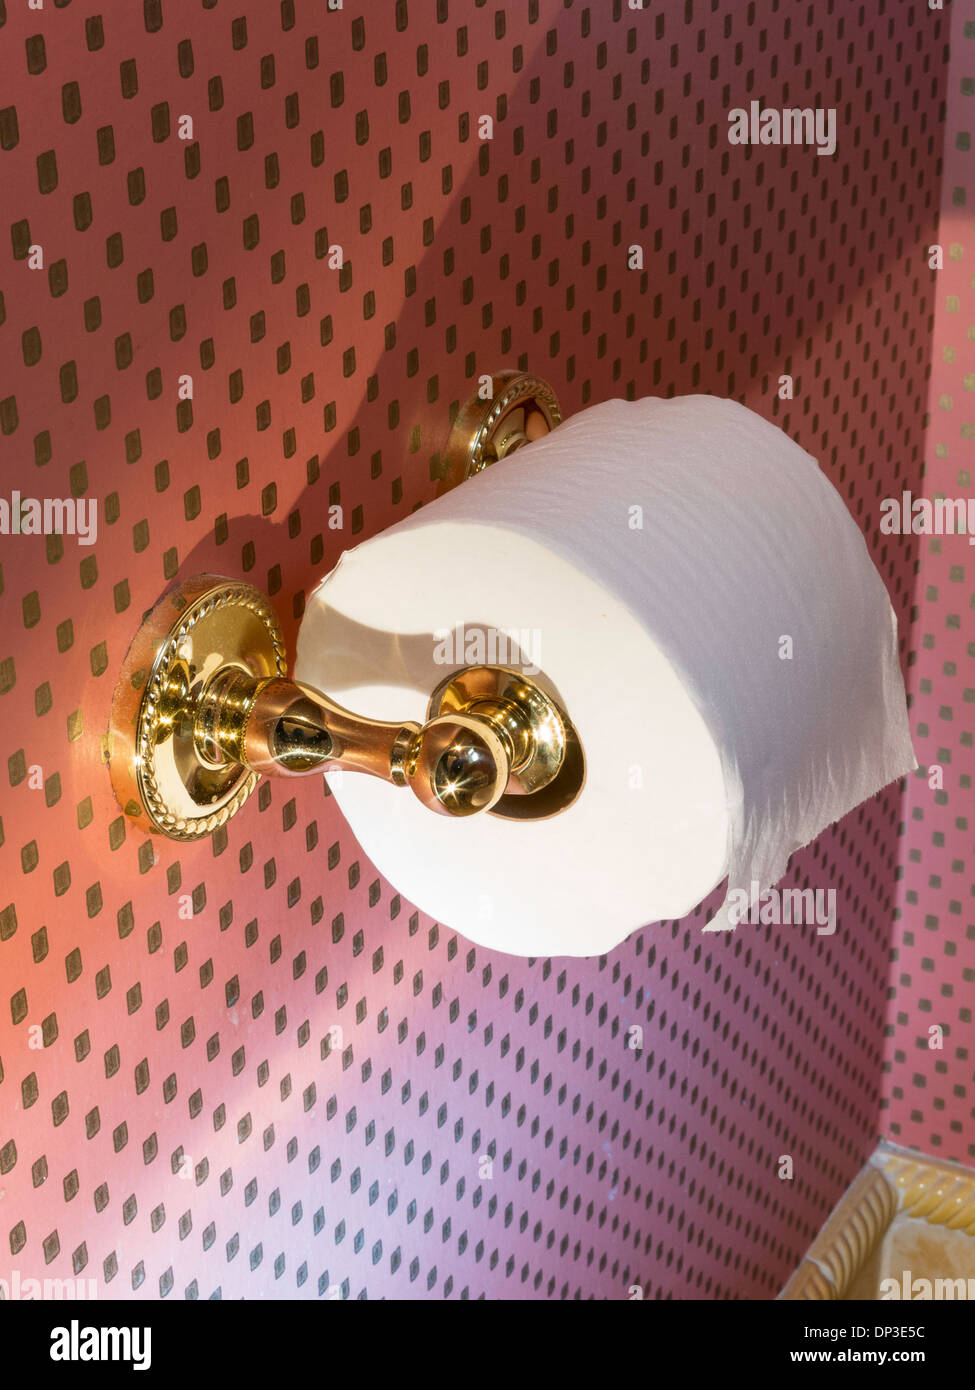 Toilet Paper (Bog Roll) in Wall Papered Orange Bathroom (Series 9 of 11  Stock Photo - Alamy